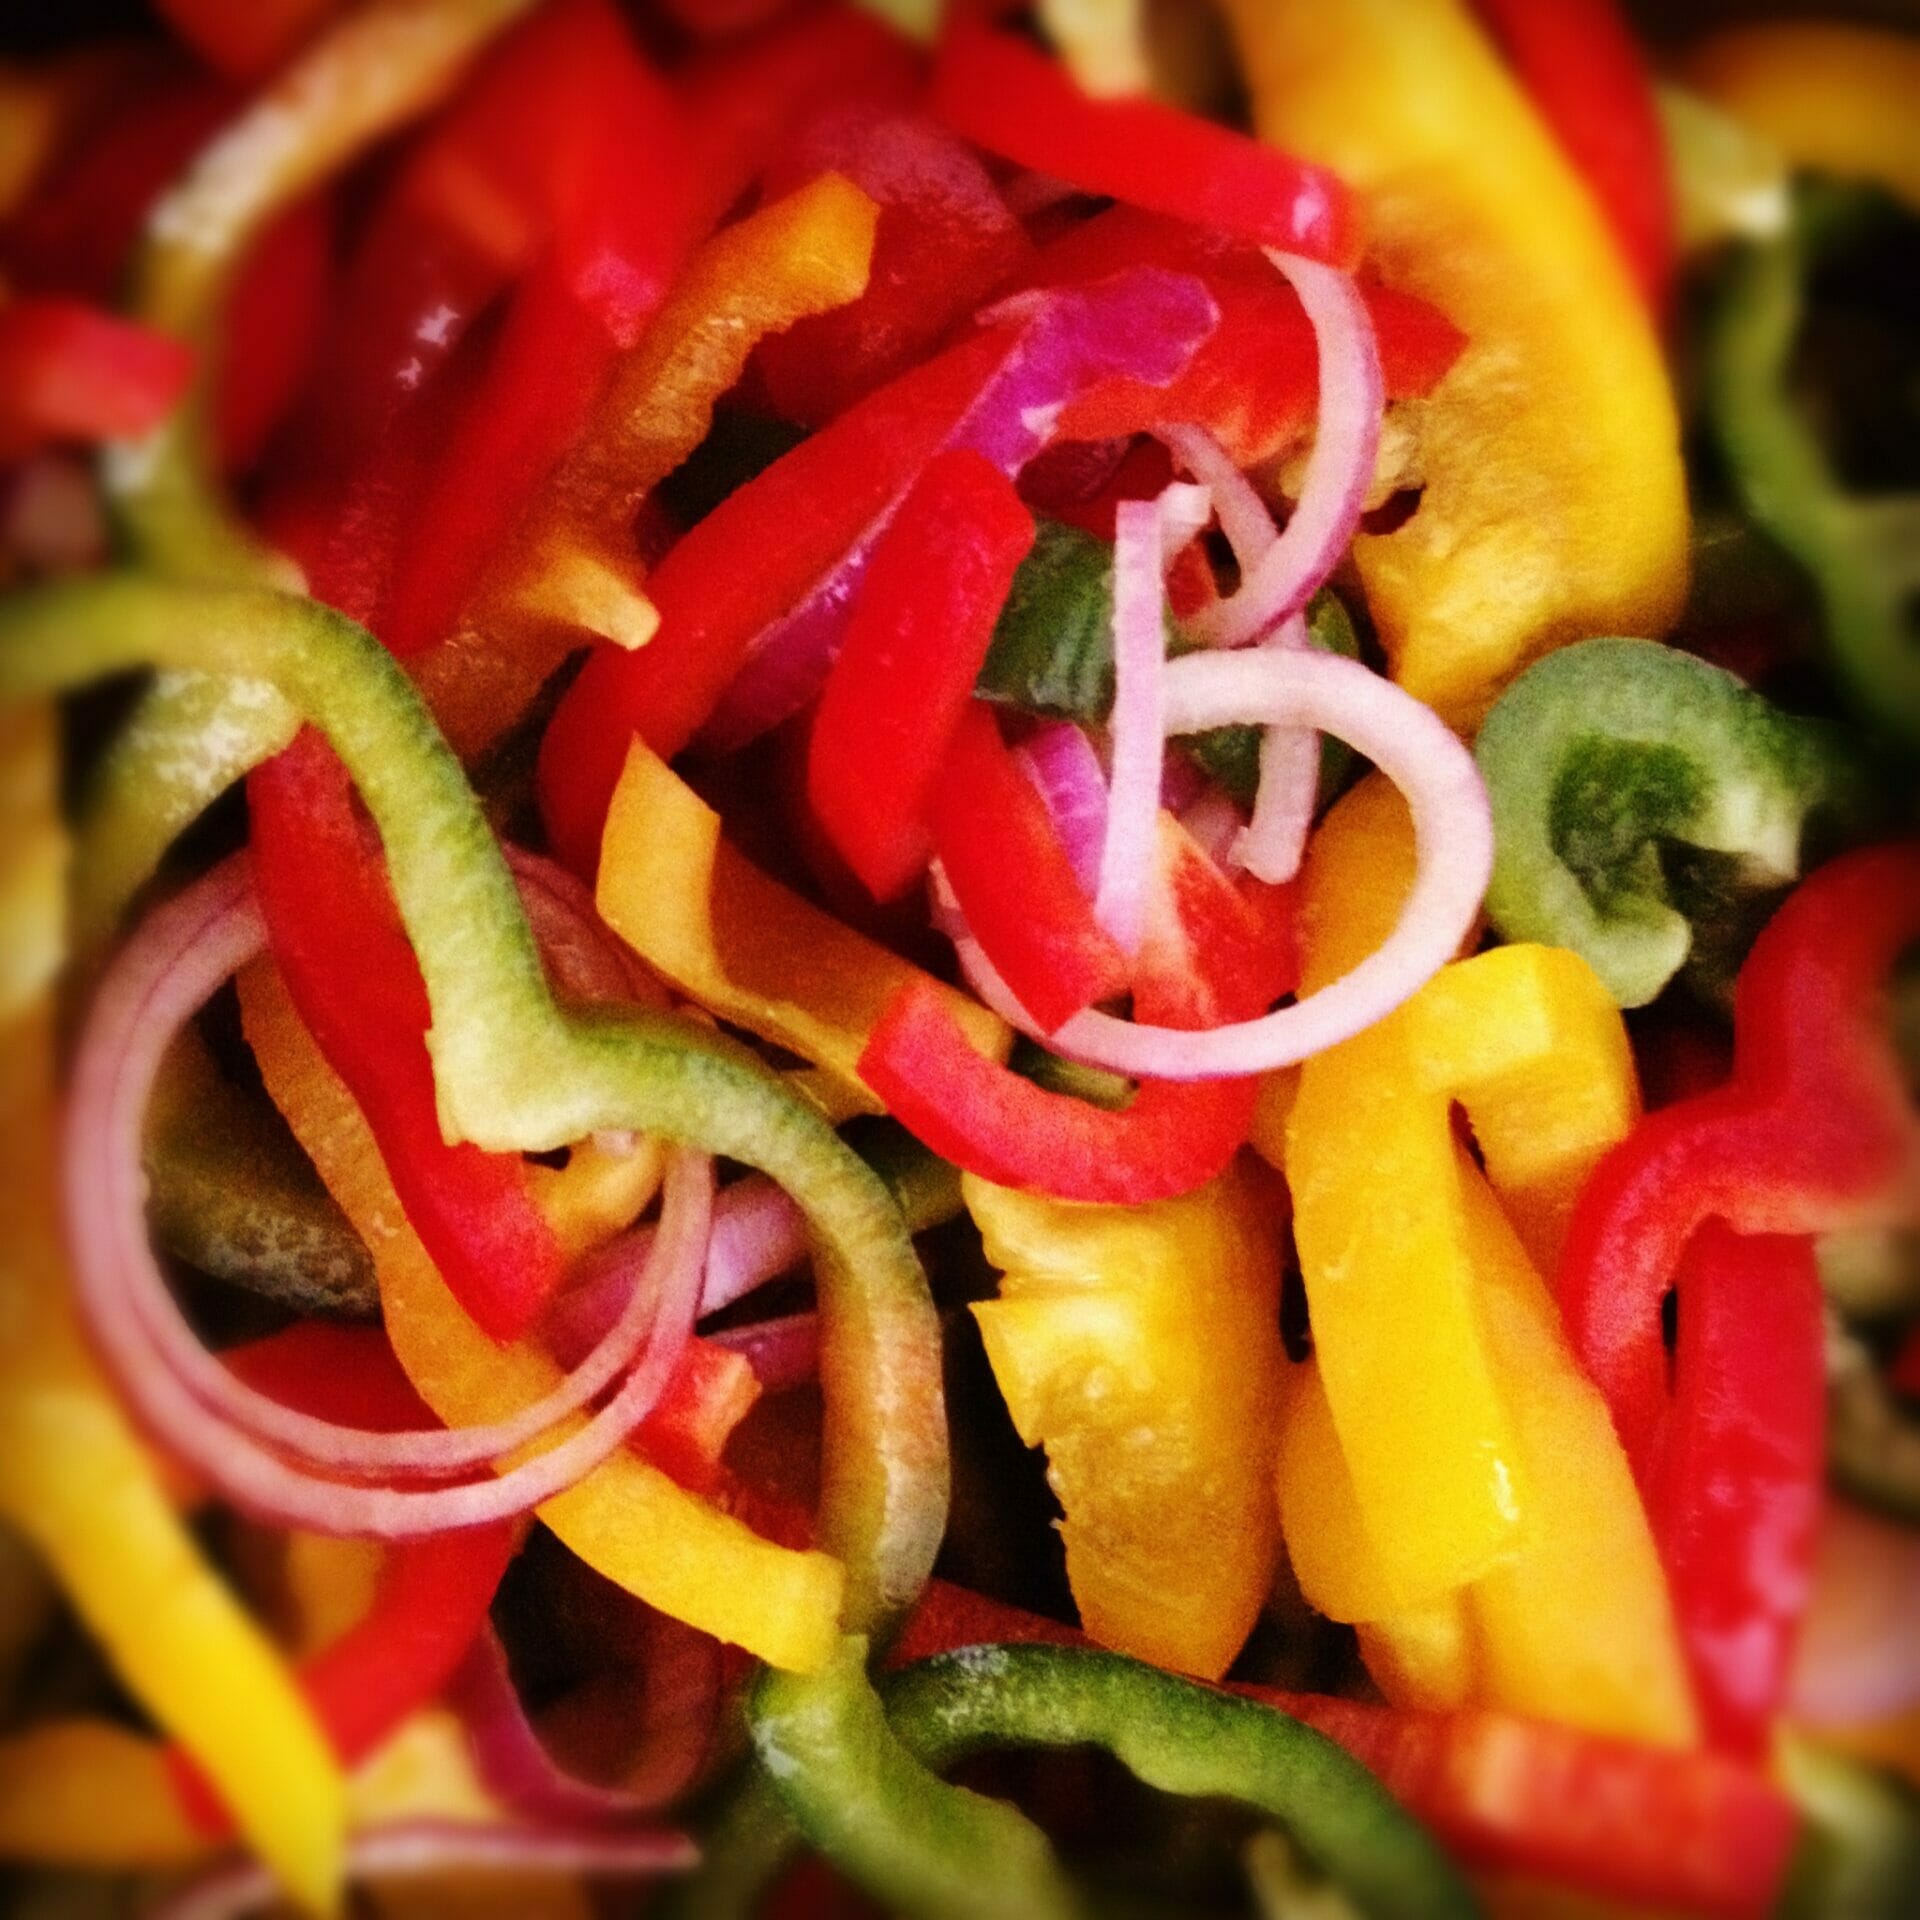 Red Onion with Green, Yellow and Red Peppers